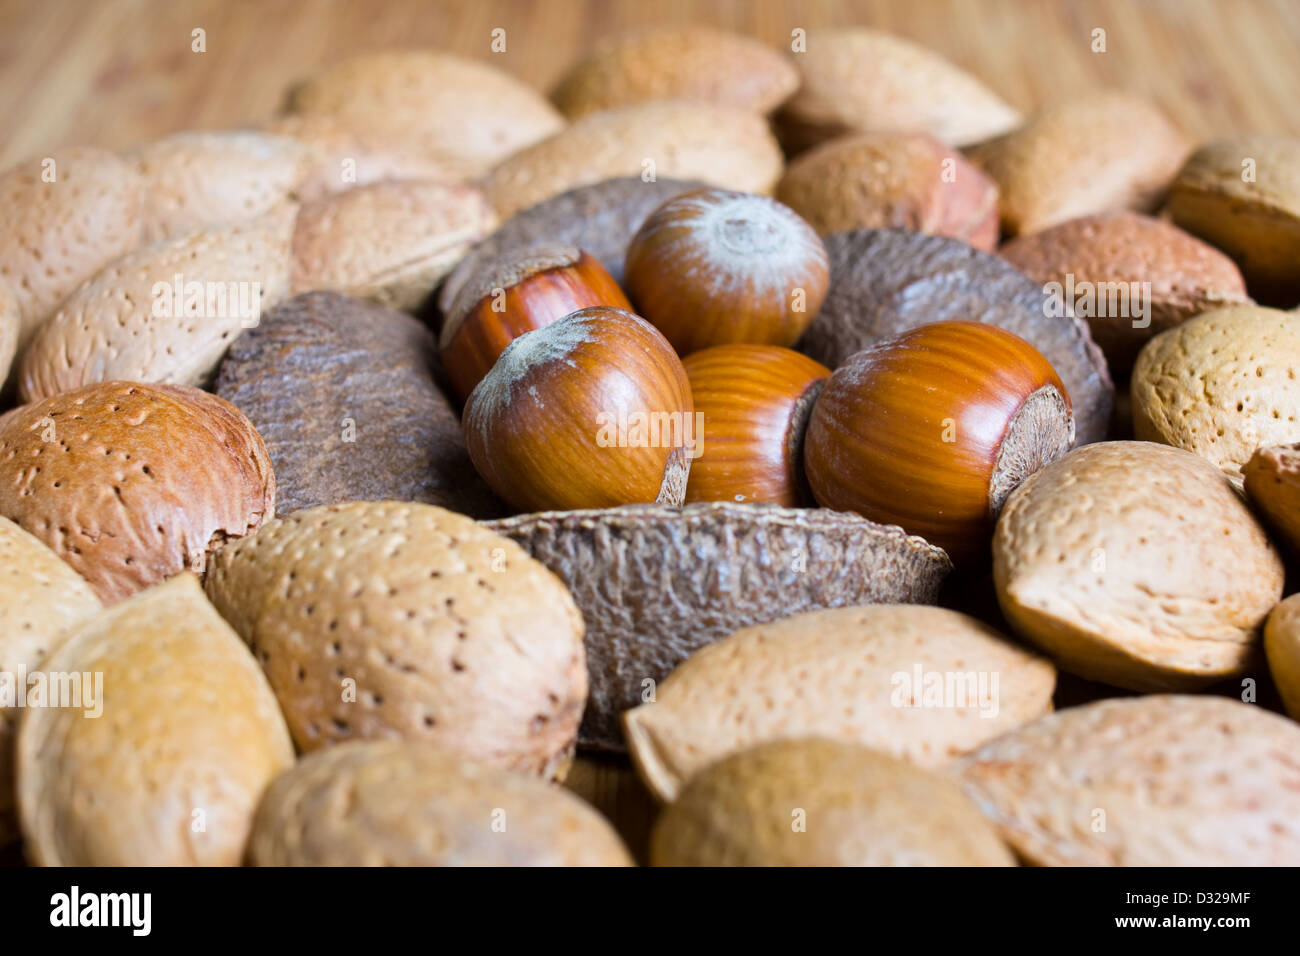 Mixed nuts in the shell selection of Brazil,almonds,walnut and hazelnuts Stock Photo